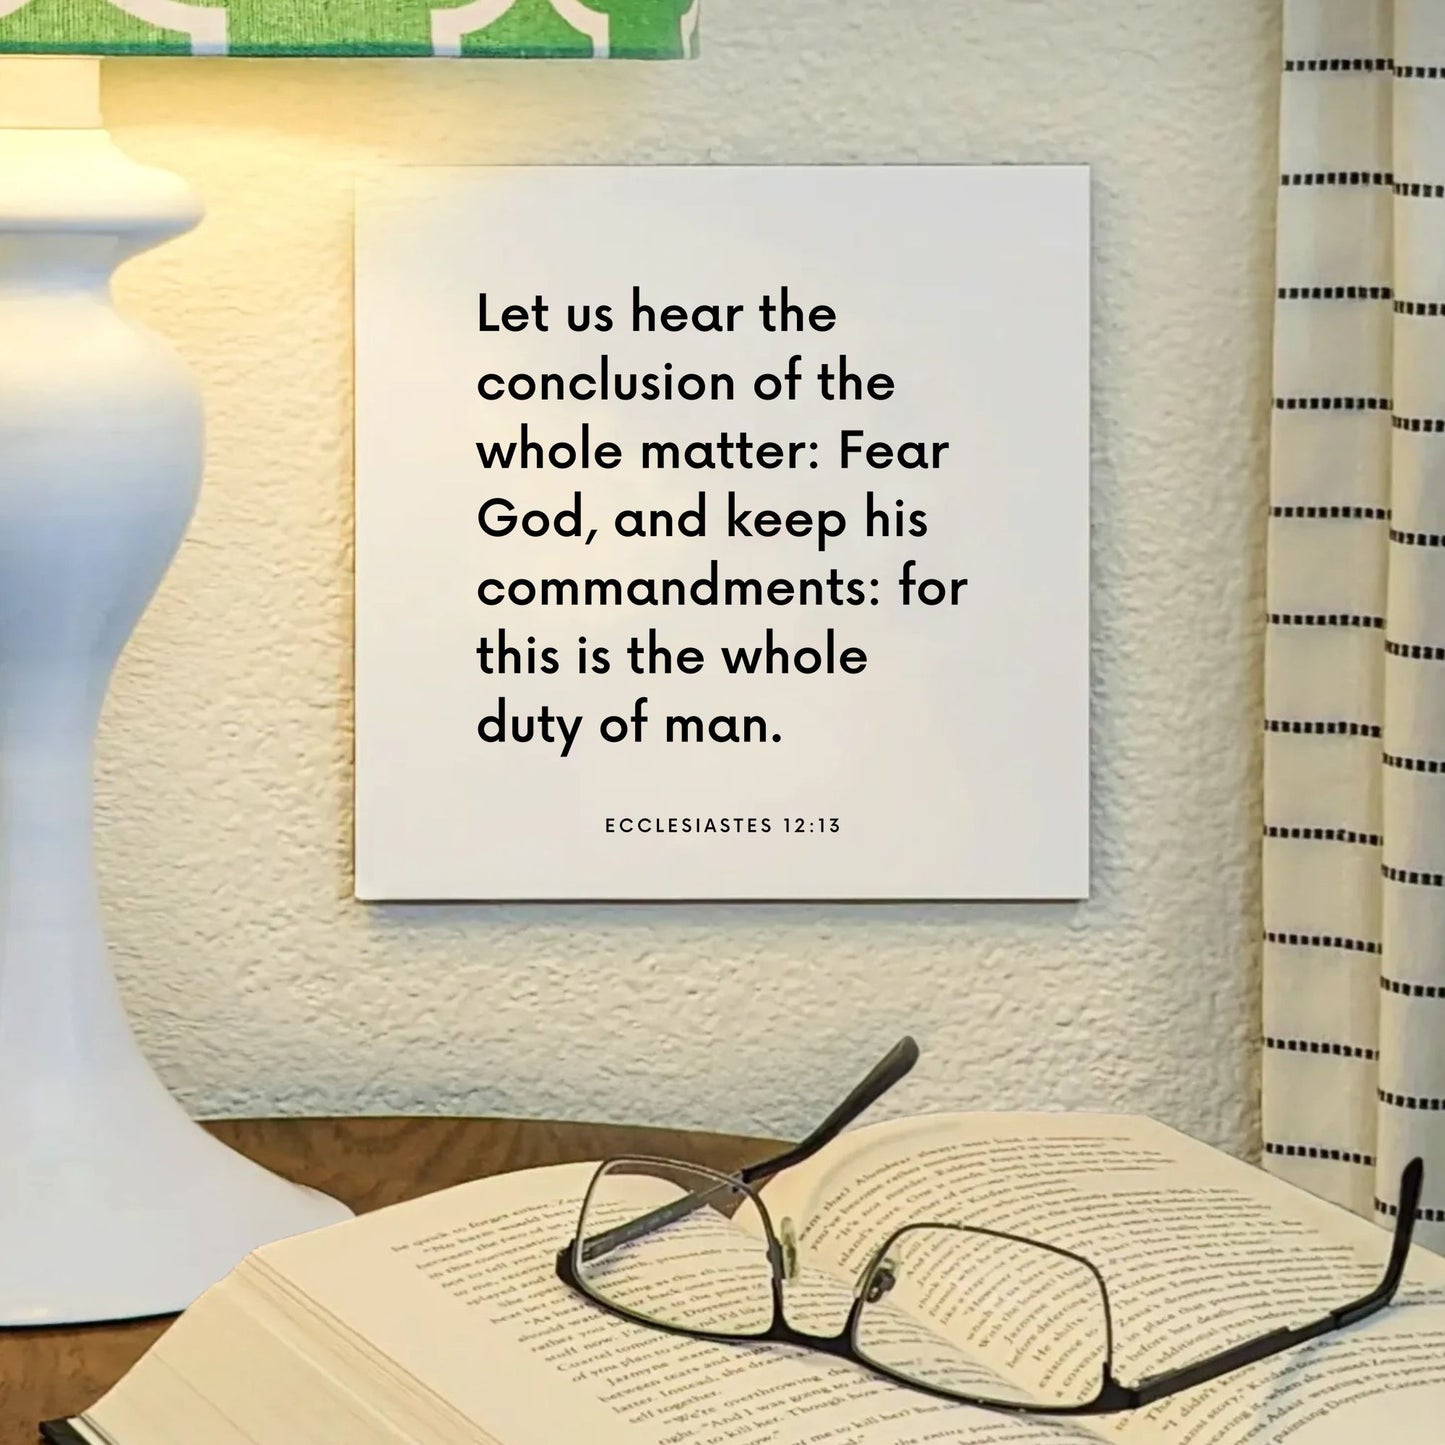 Lamp mouting of the scripture tile for Ecclesiastes 12:13 - "Let us hear the conclusion of the whole matter: Fear God"